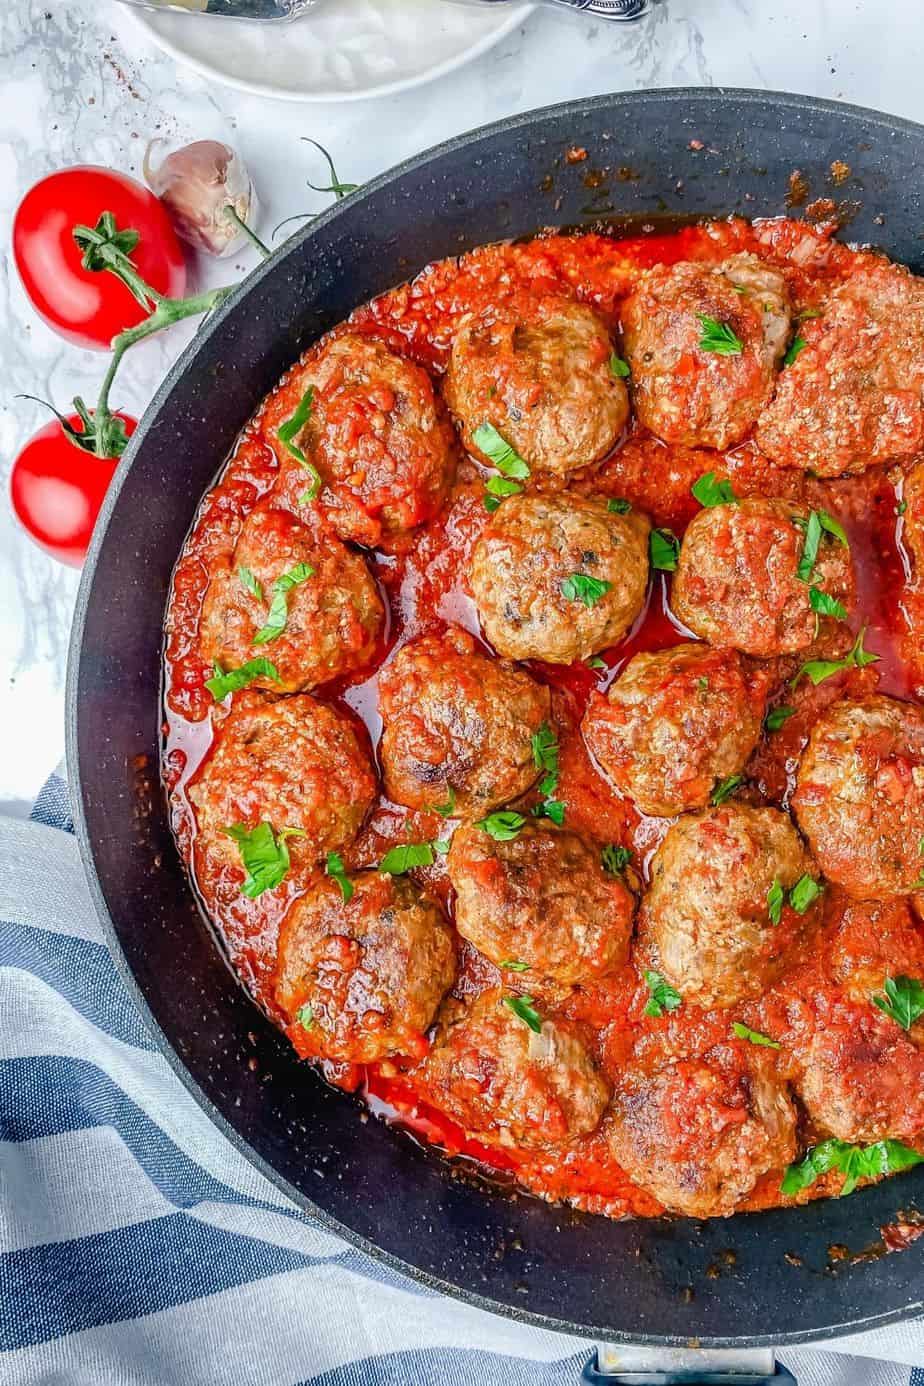 These easy meatballs in tomato sauce are made with pork and beef ground meat. A delicious blend of flavors and a dinner recipe that you can’t go wrong with. Guaranteed to feed and satisfy your family or guests in no time - The Yummy Bowl